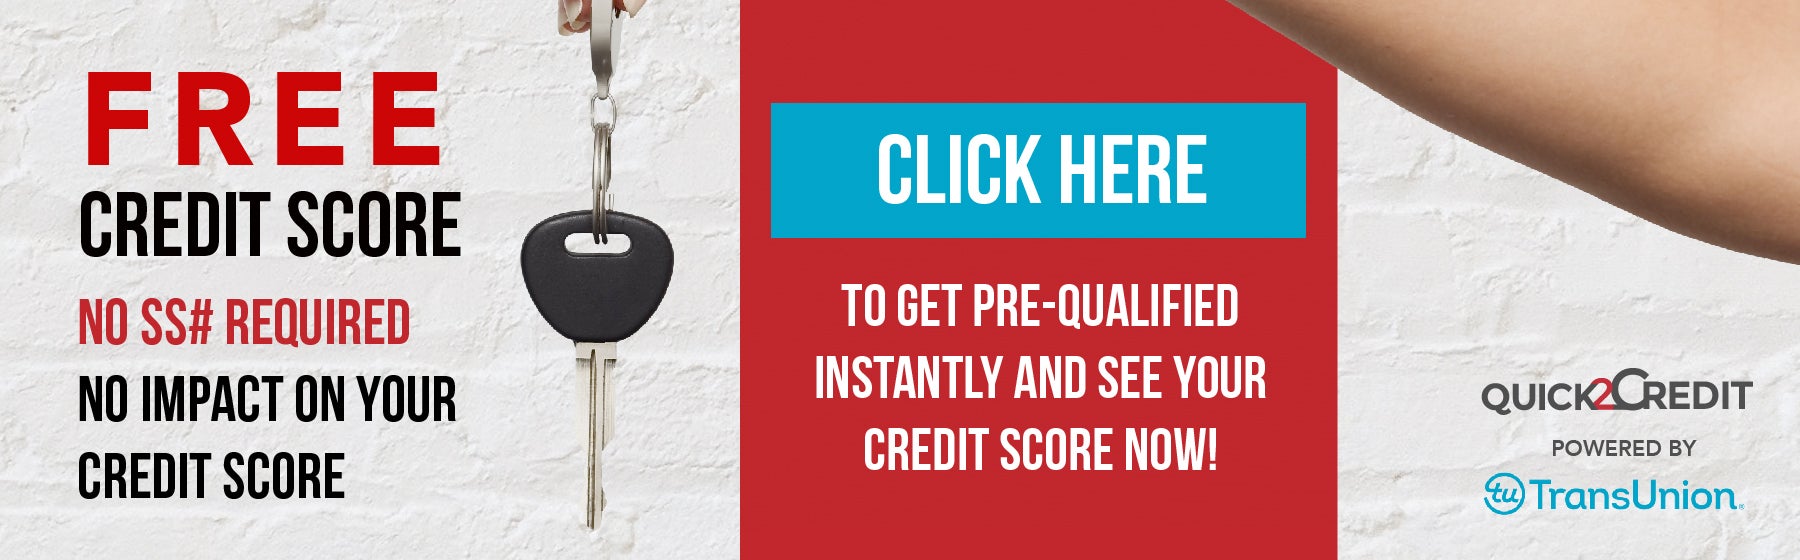 Get Pre Qualified, Instantly!